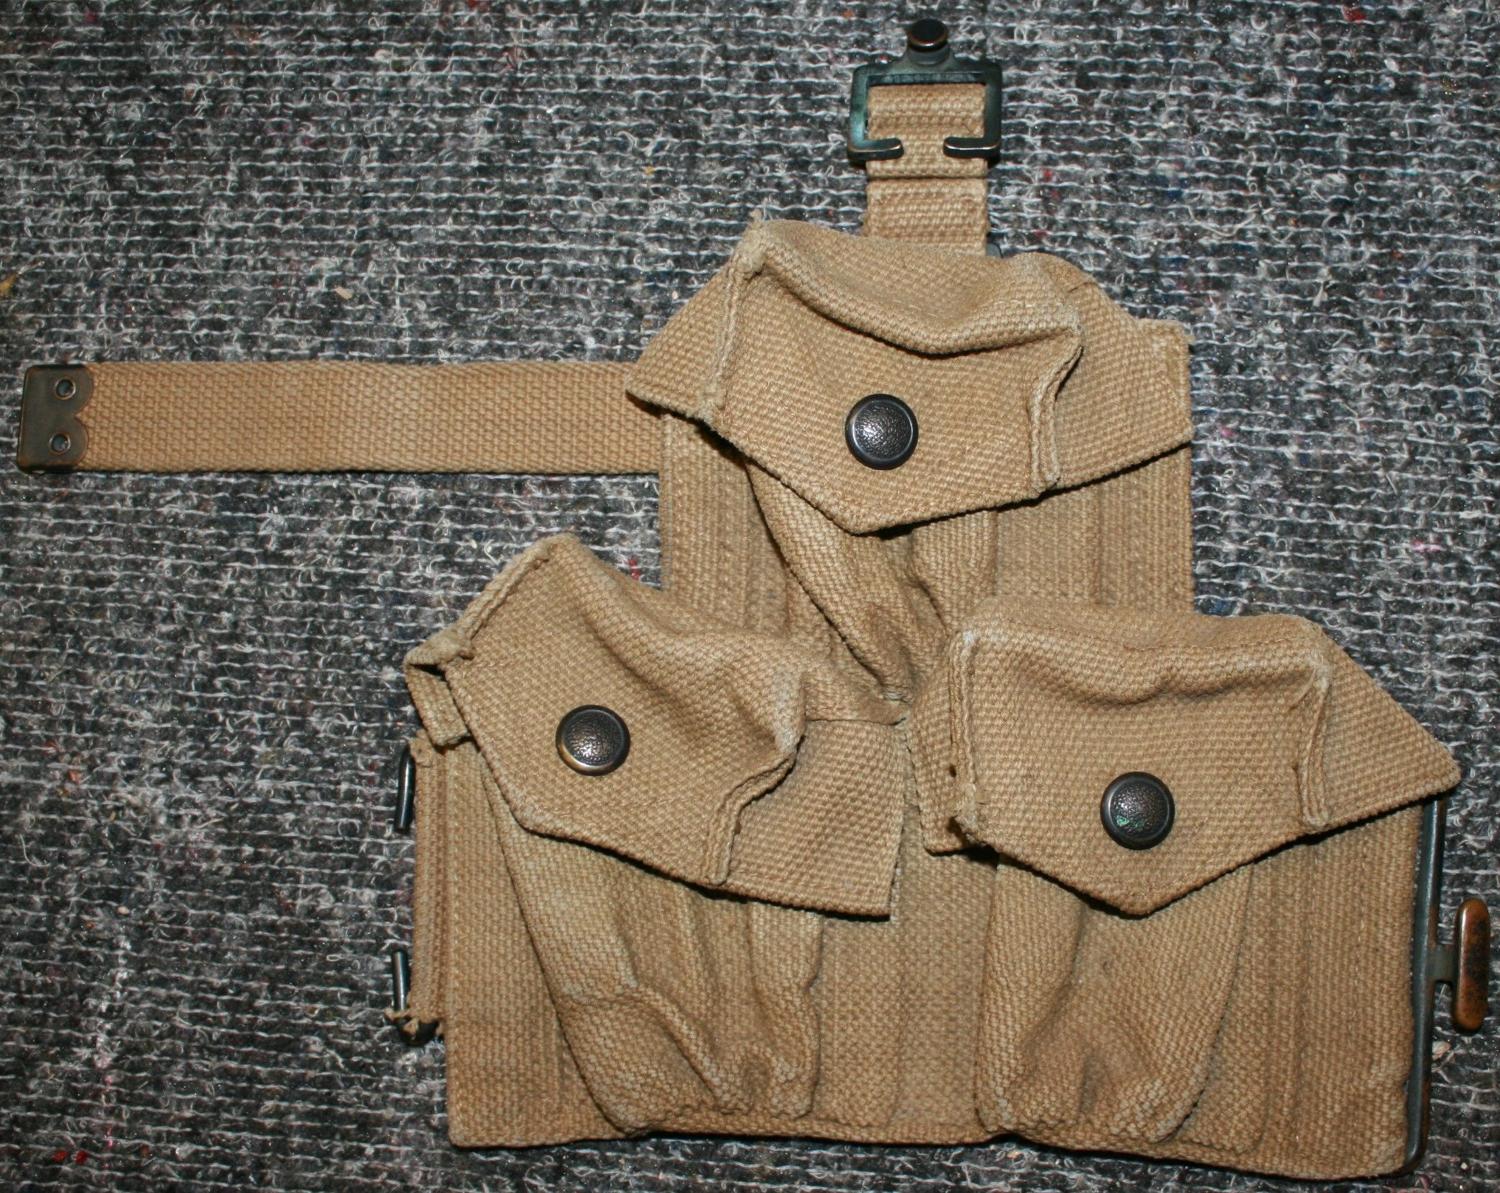 A 1916 MILLS EQUIPMENT RIGHT HAND SIDE AMMO POUCH